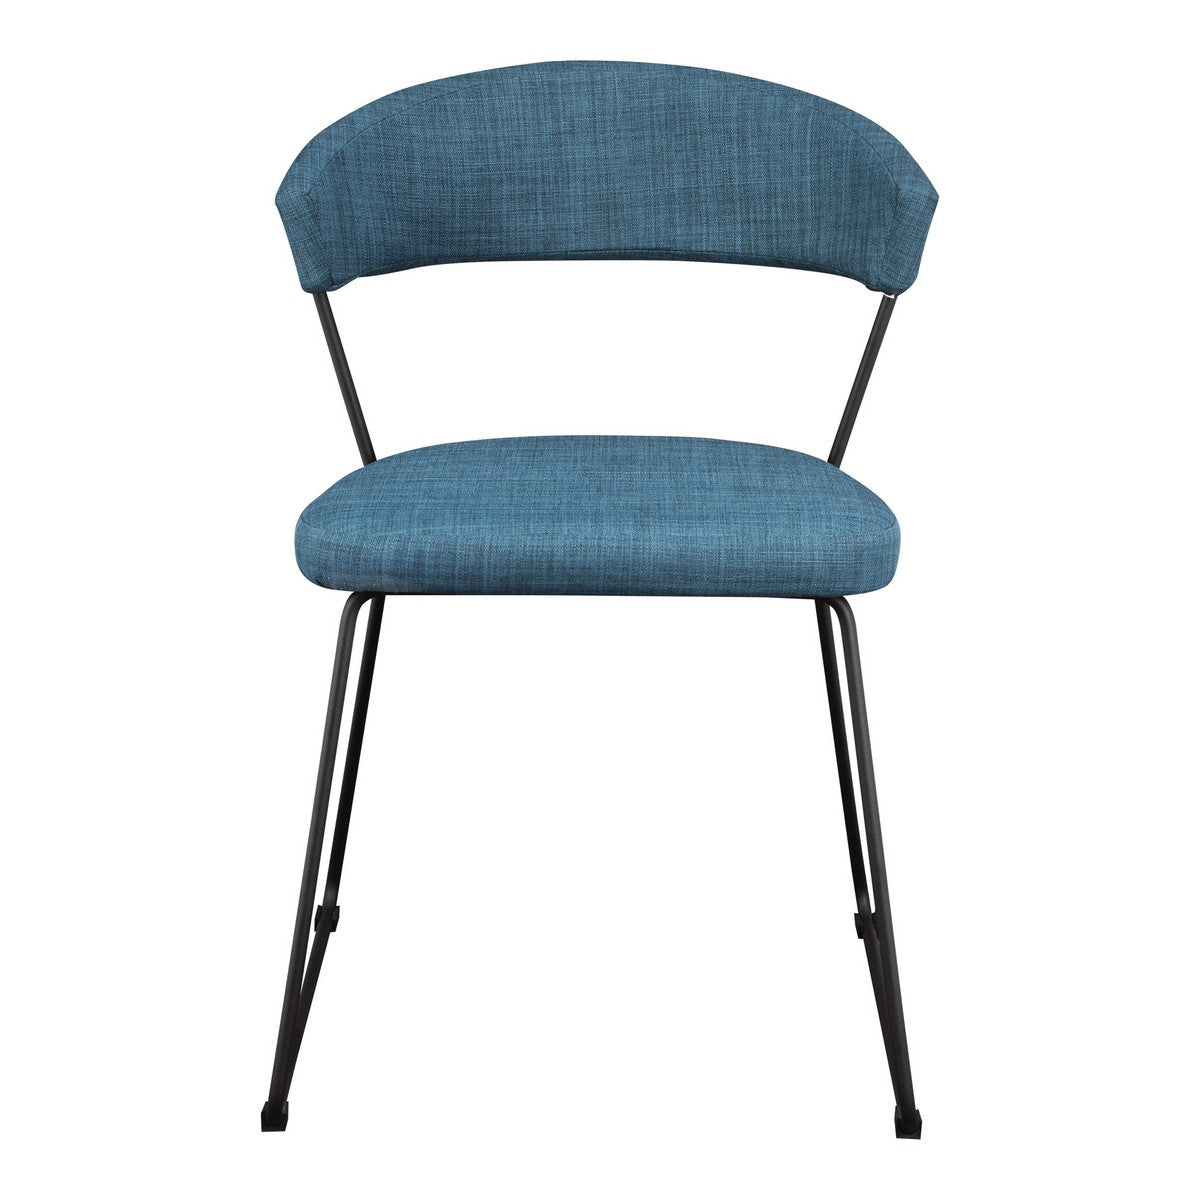 Moe's Home Collection Adria Dining Chair Blue-Set of Two - HK-1010-50